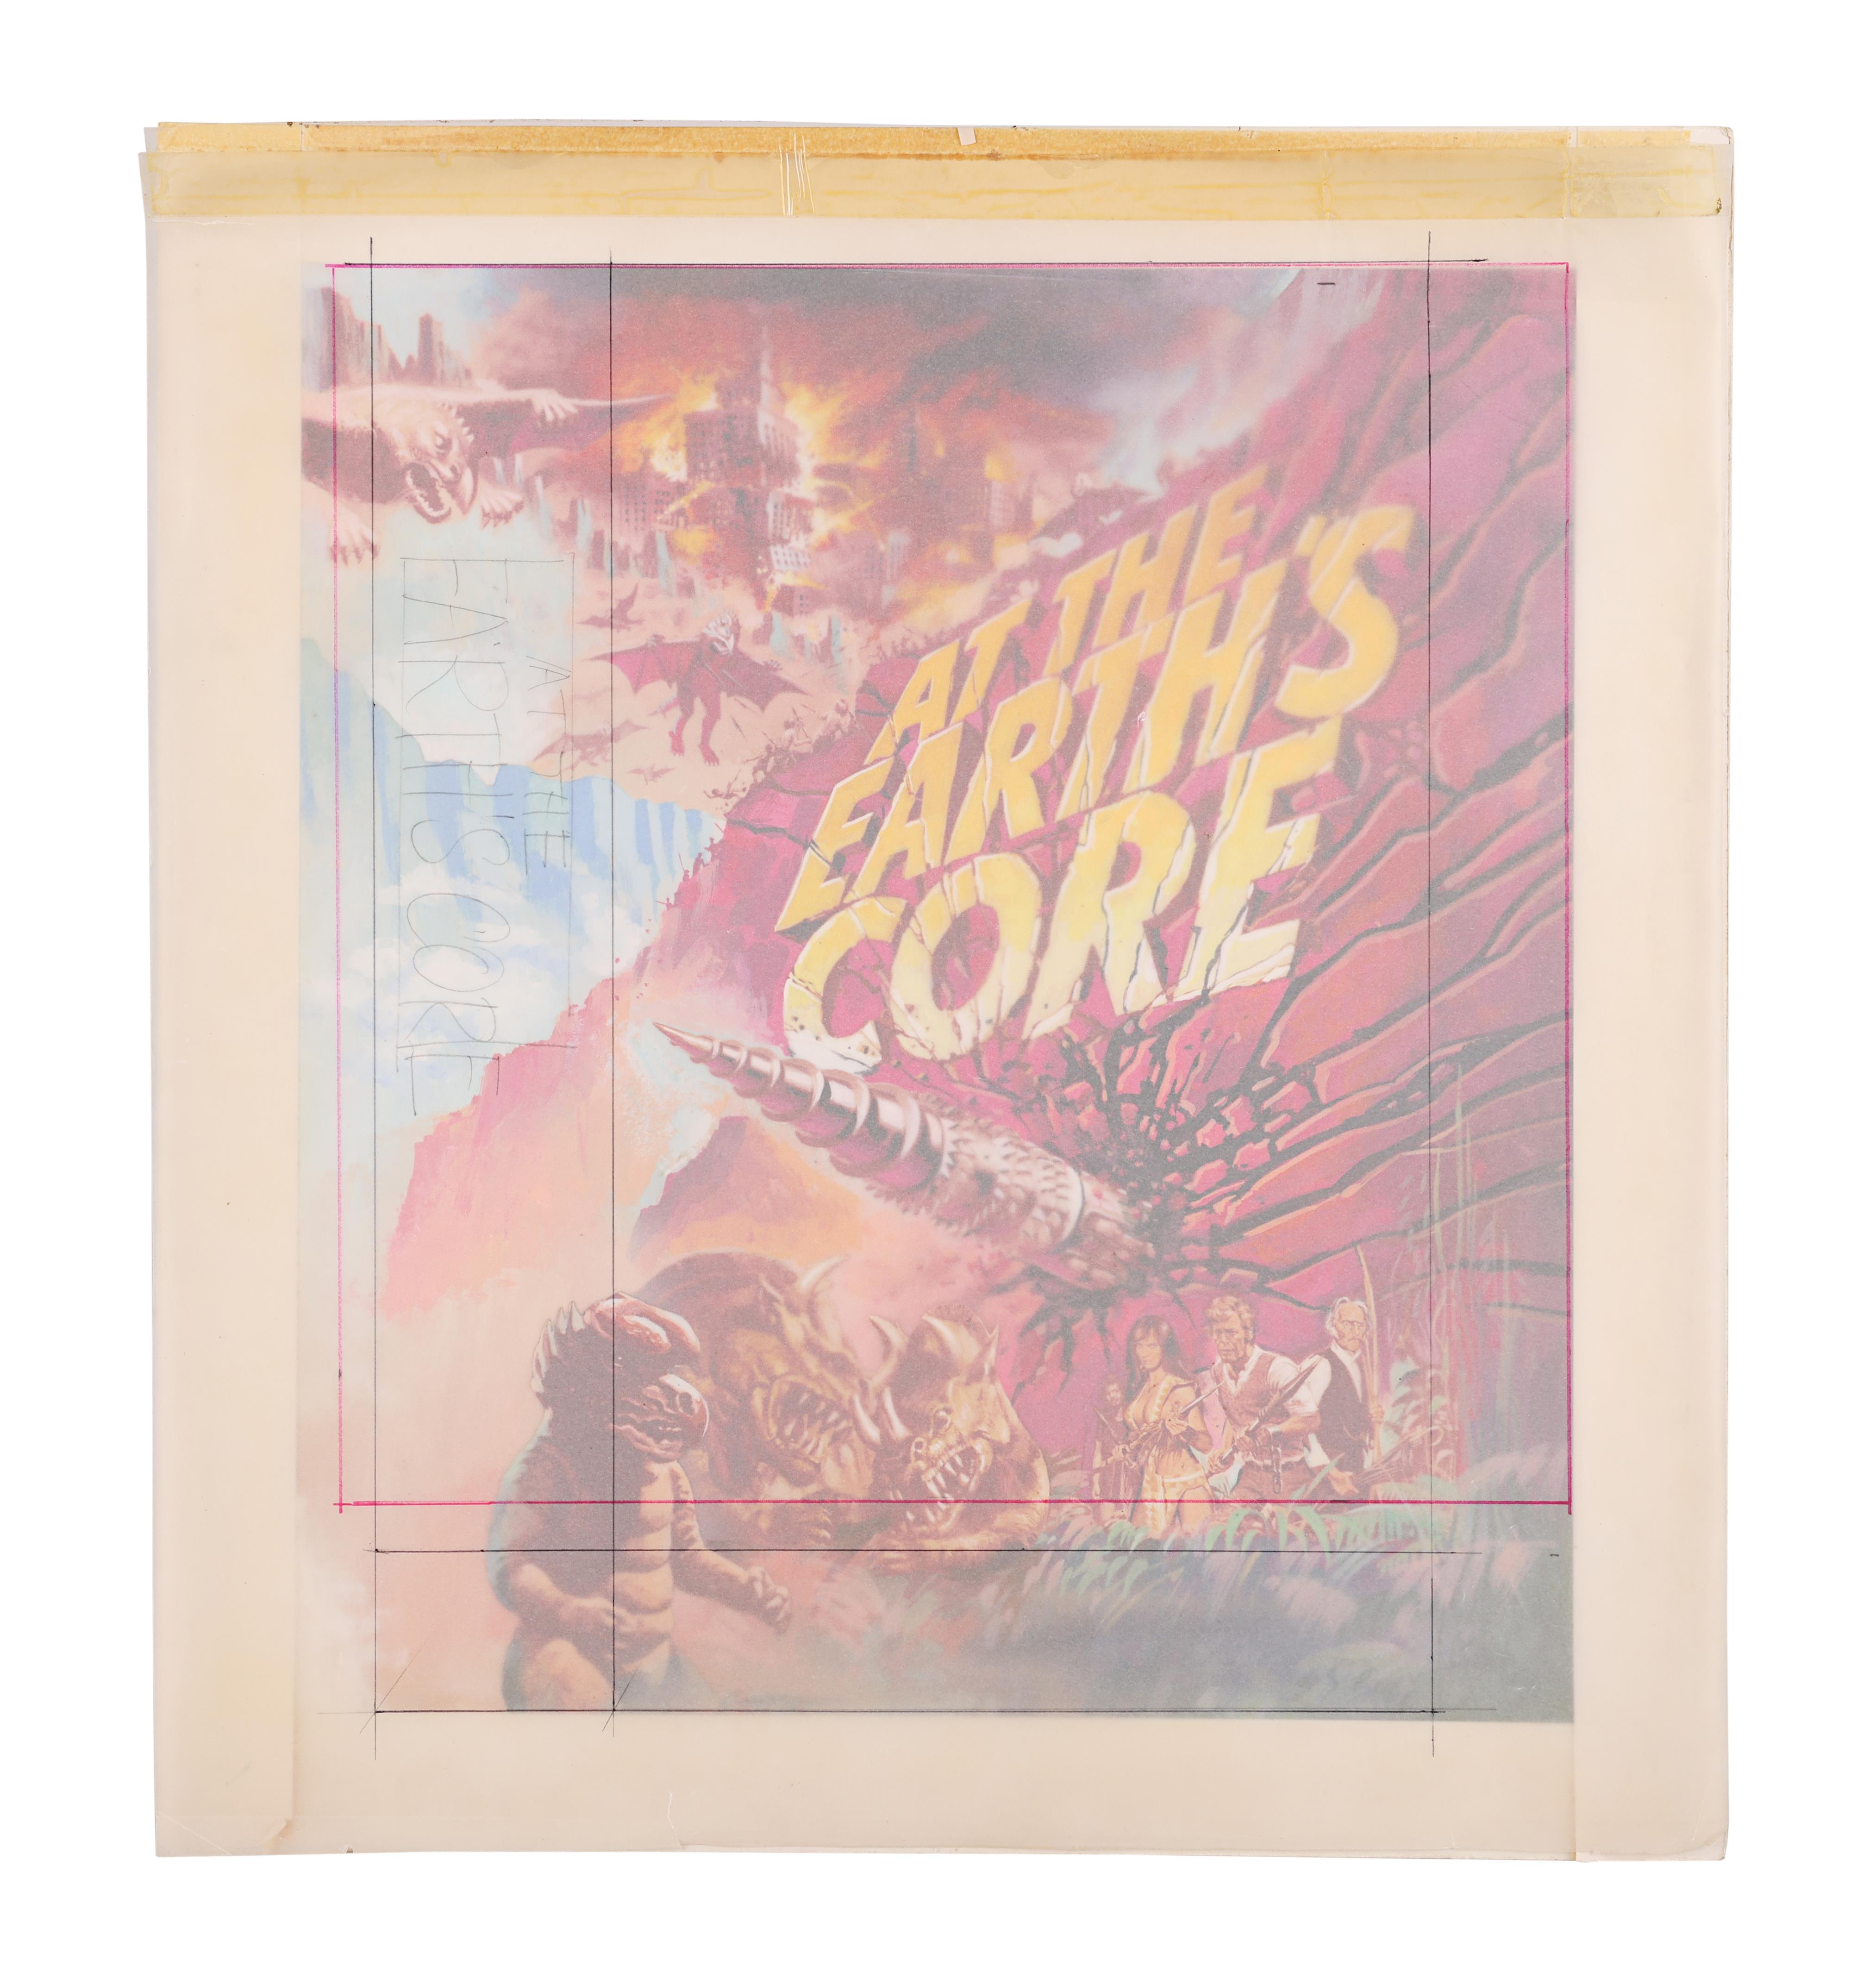 AT THE EARTH'S CORE (1976) - Original Poster Composition Artwork, 1976 - Image 2 of 2